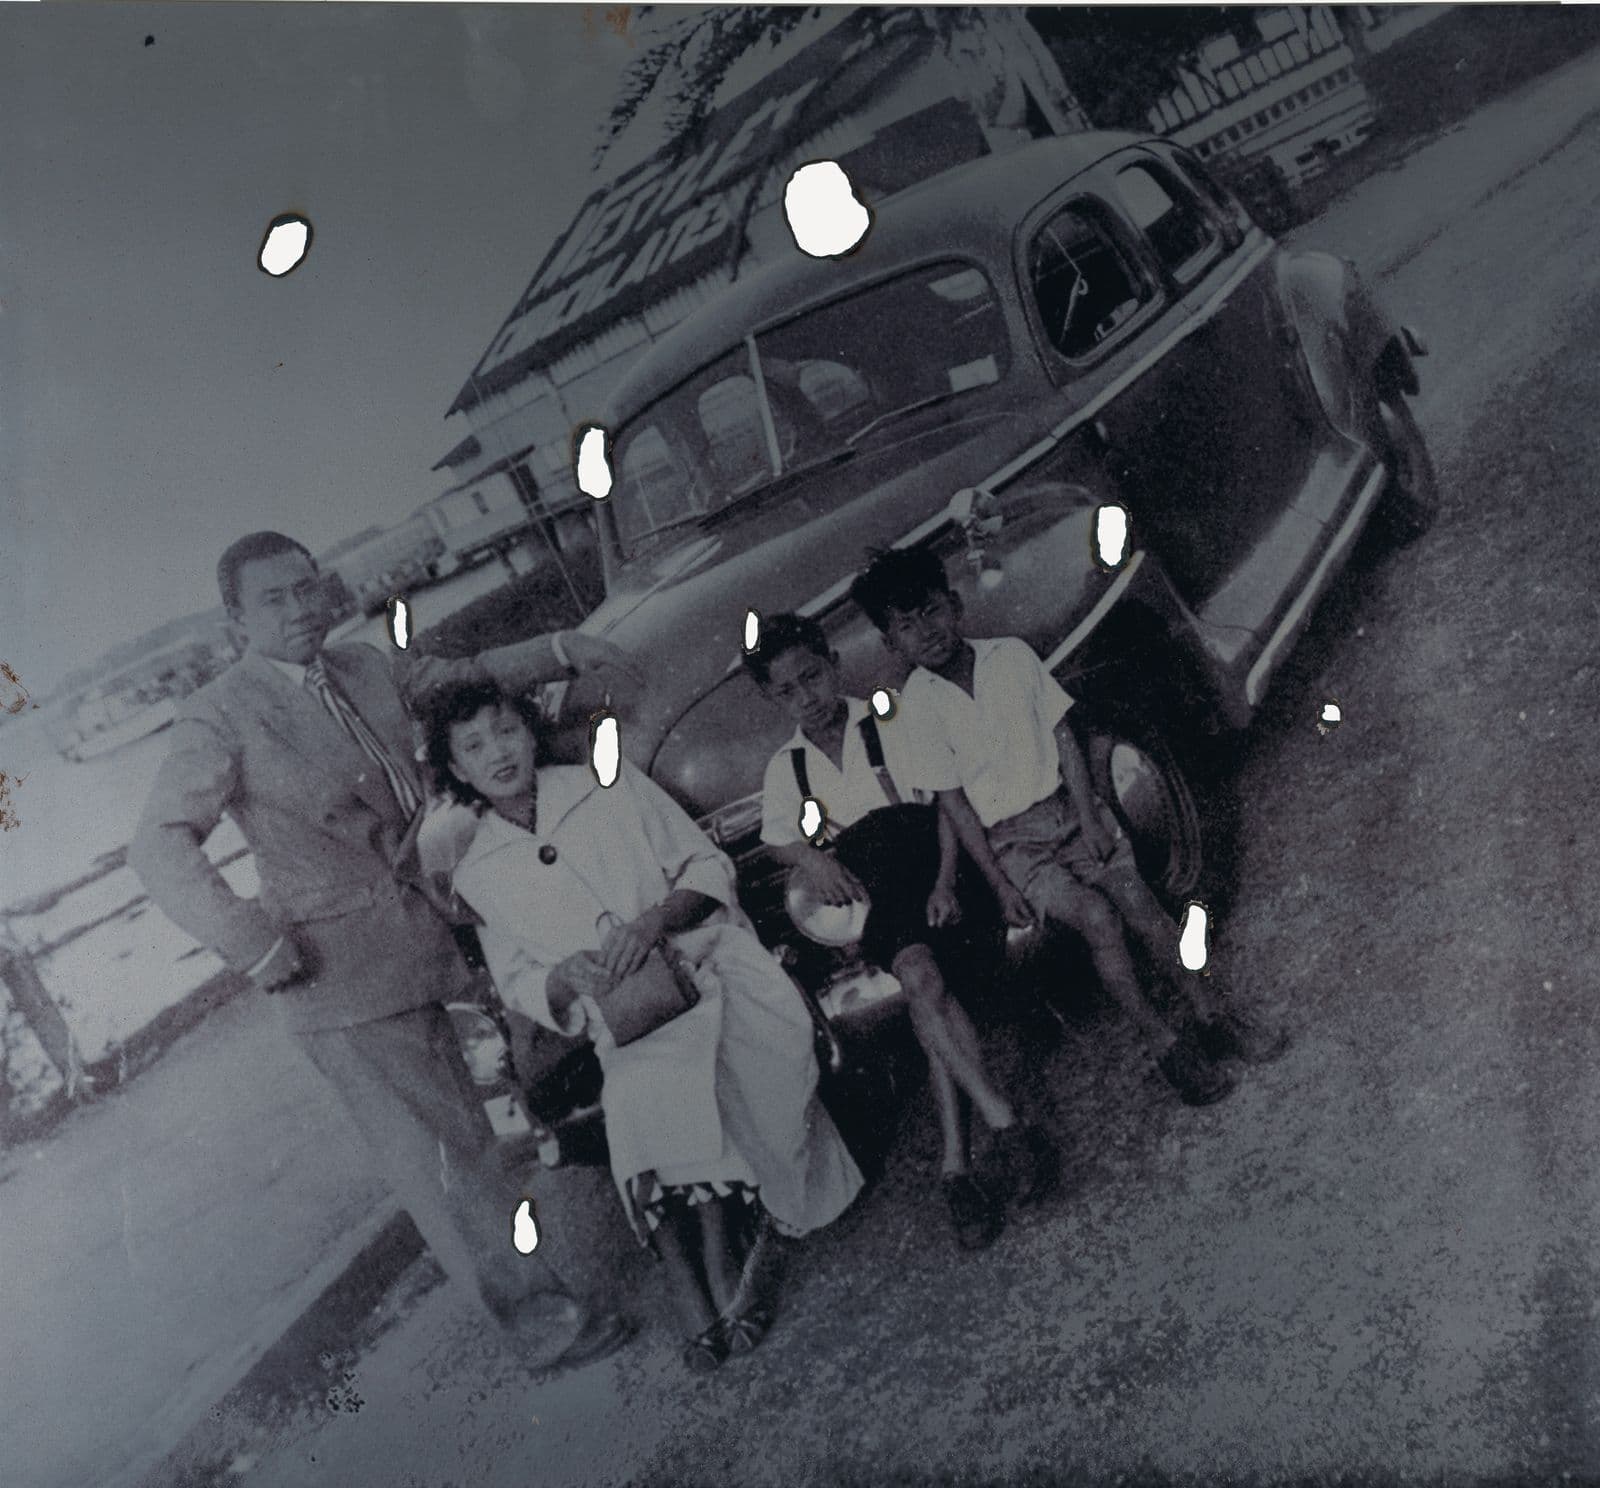 A black and white UV-cured pigment print of a photograph of an 1960s family